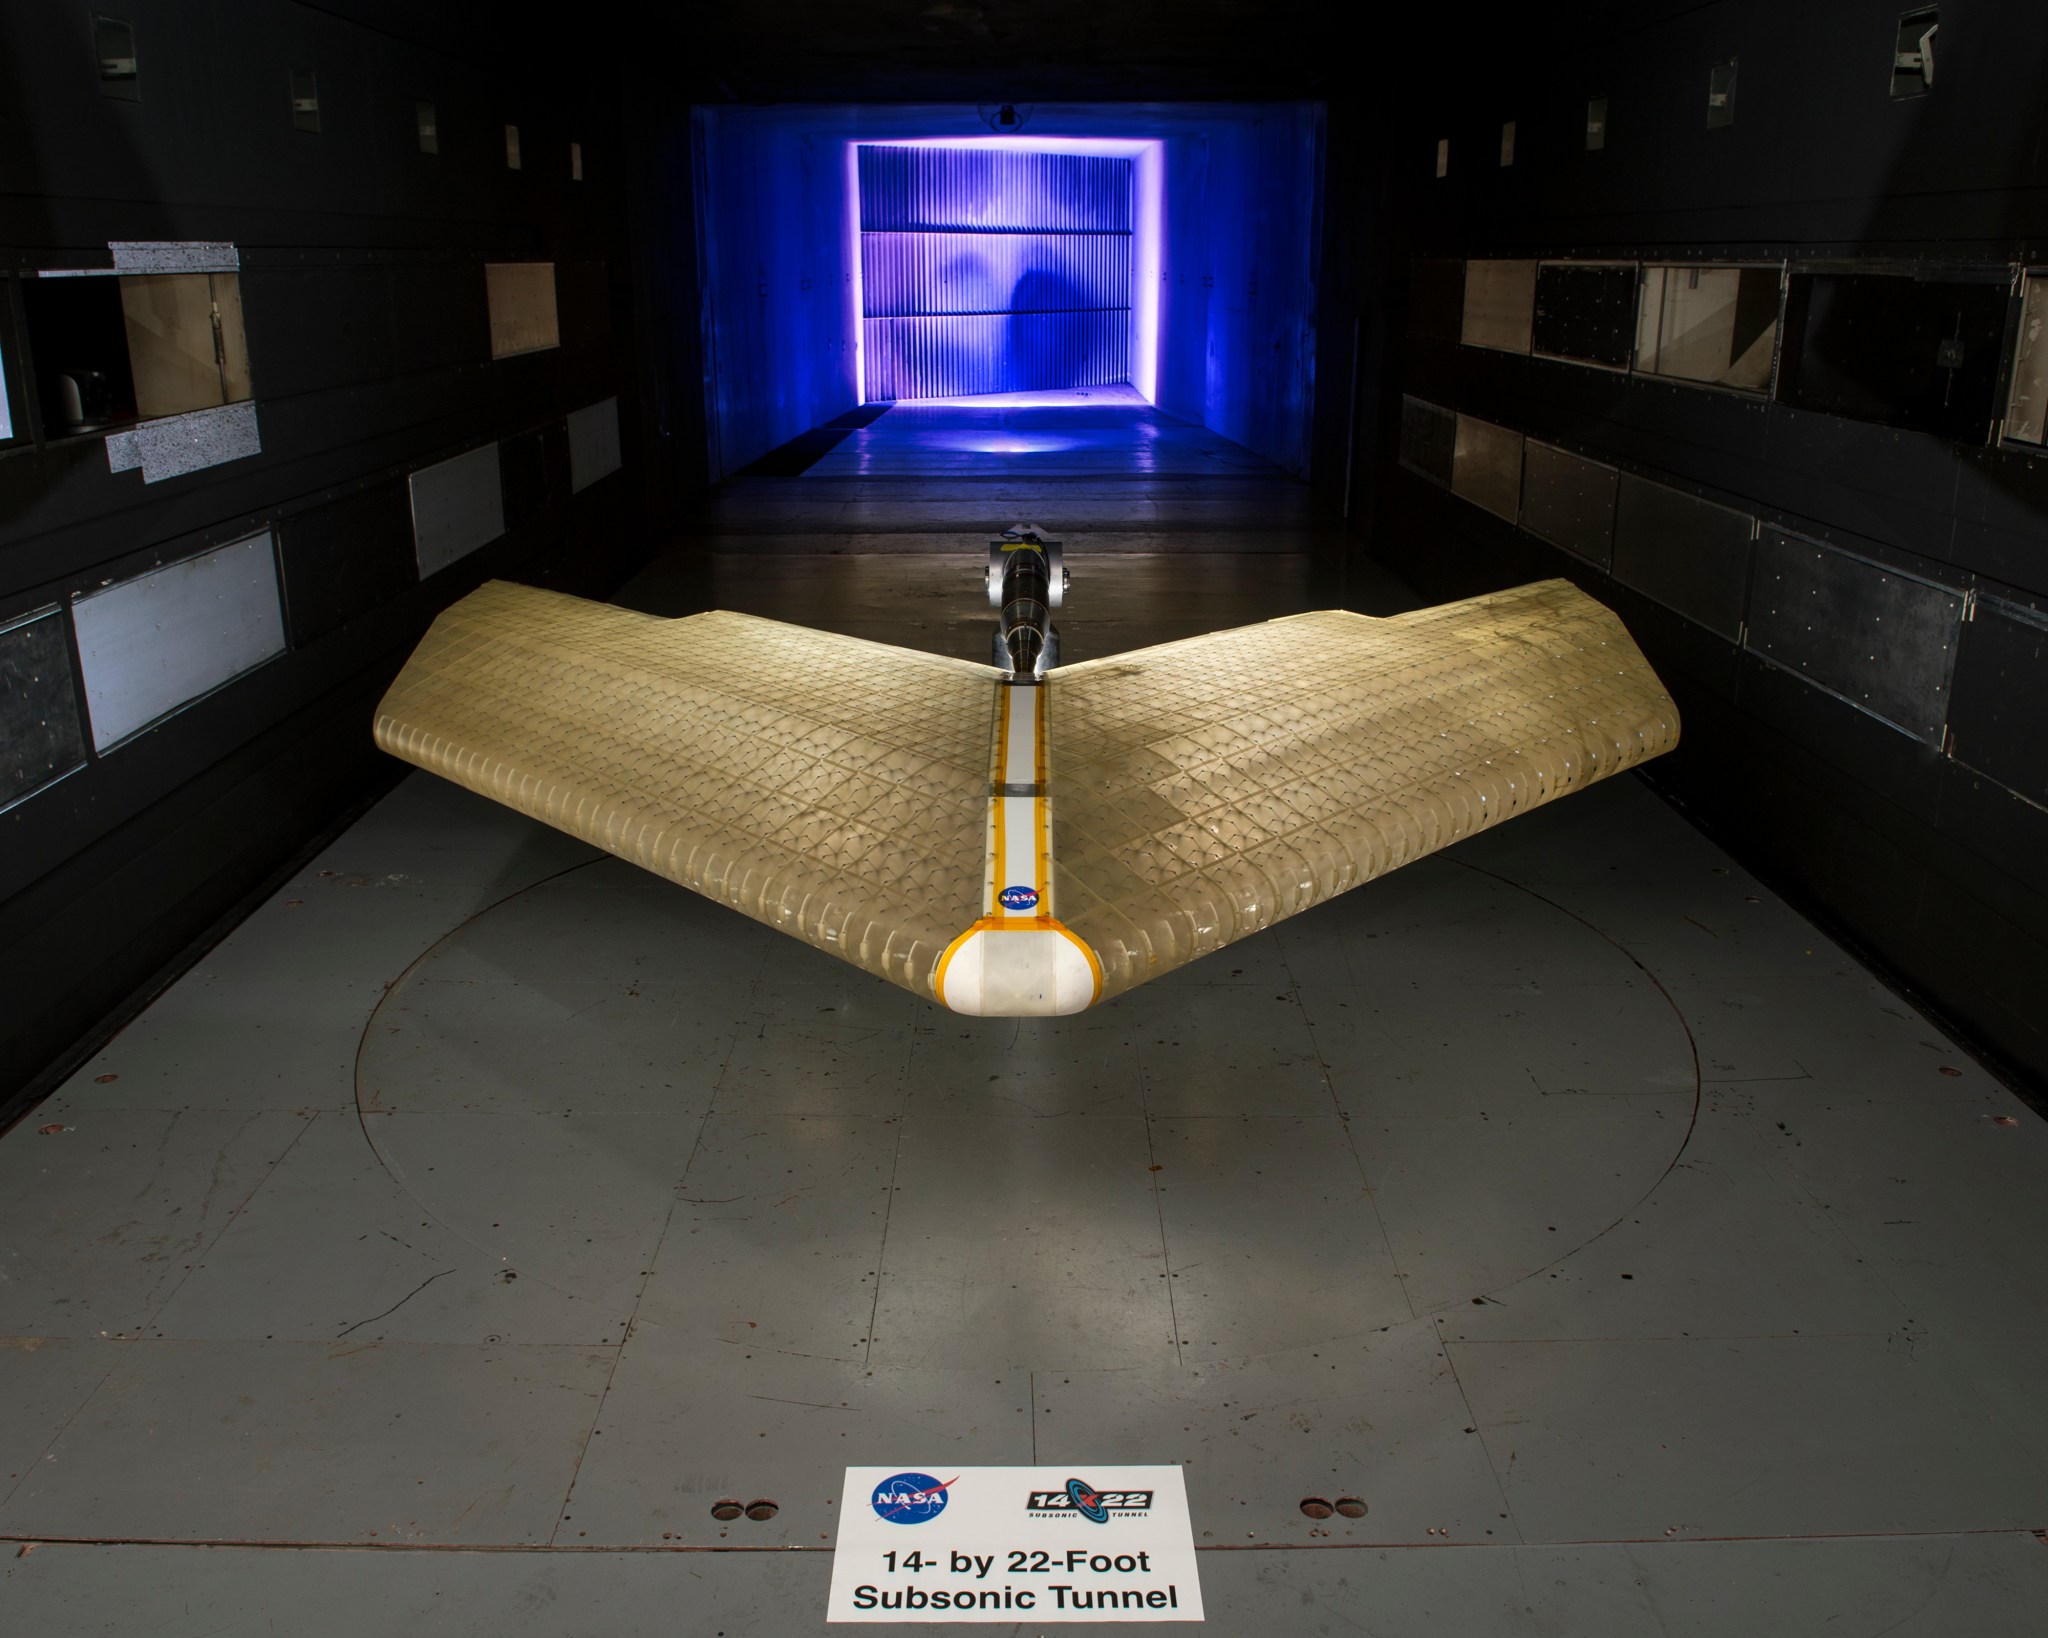 The MADCAT wing during assembly, preparing to be tested in NASA's Langley Research Center's 14 x 22 feet wind tunnel.